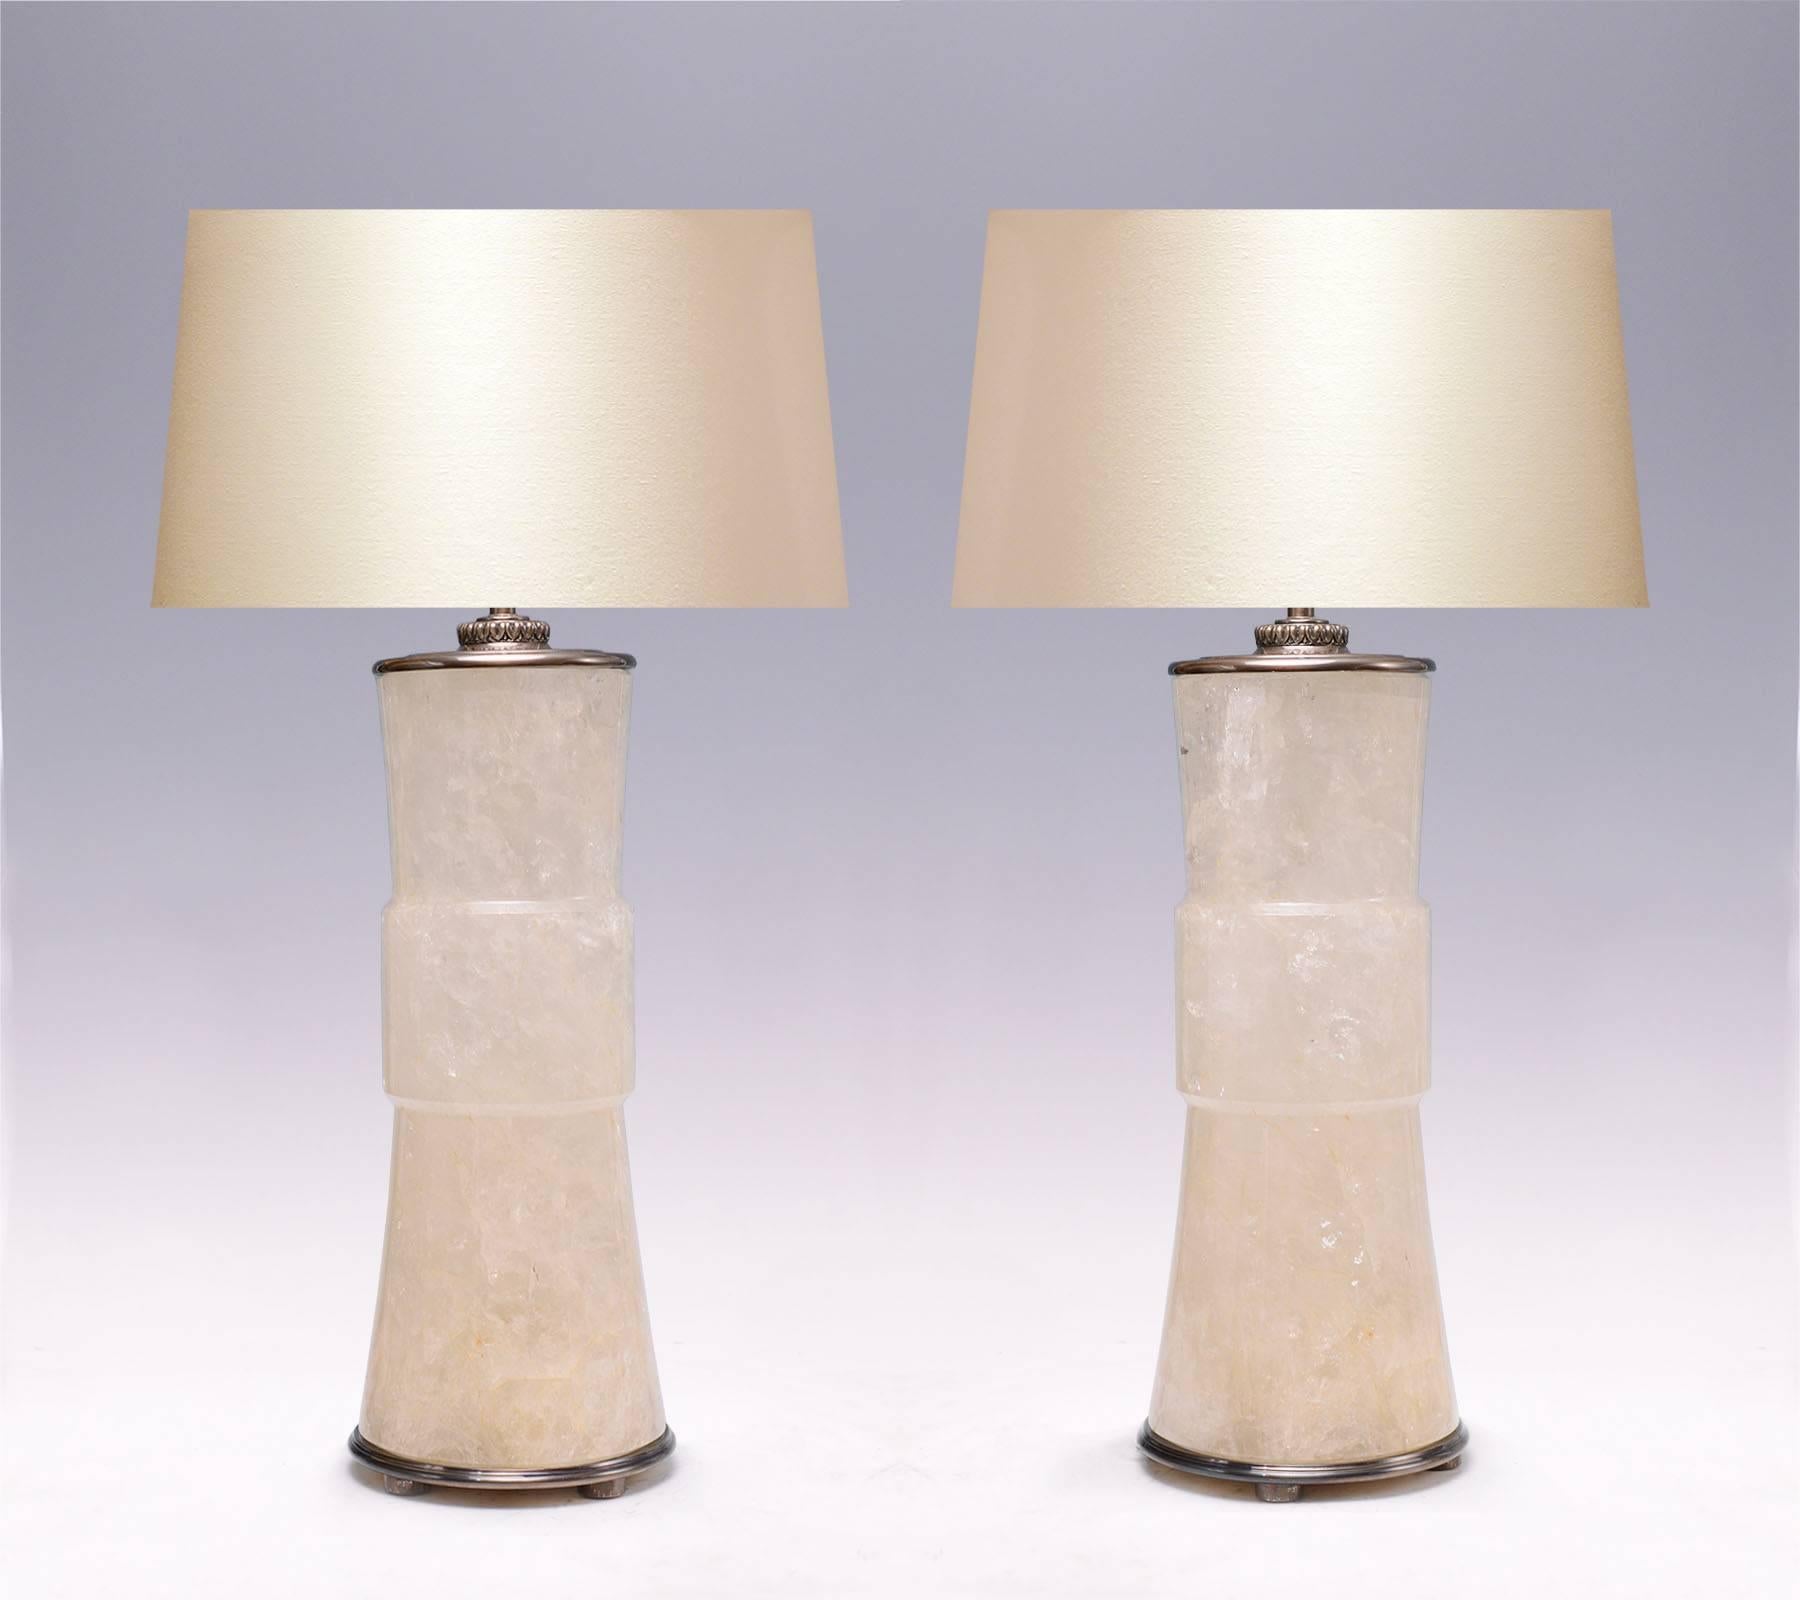 A pair of modern elegant form rock crystal quartz lamps with antique brass finish, created by Phoenix Gallery, NYC.
To the rock crystal: 18